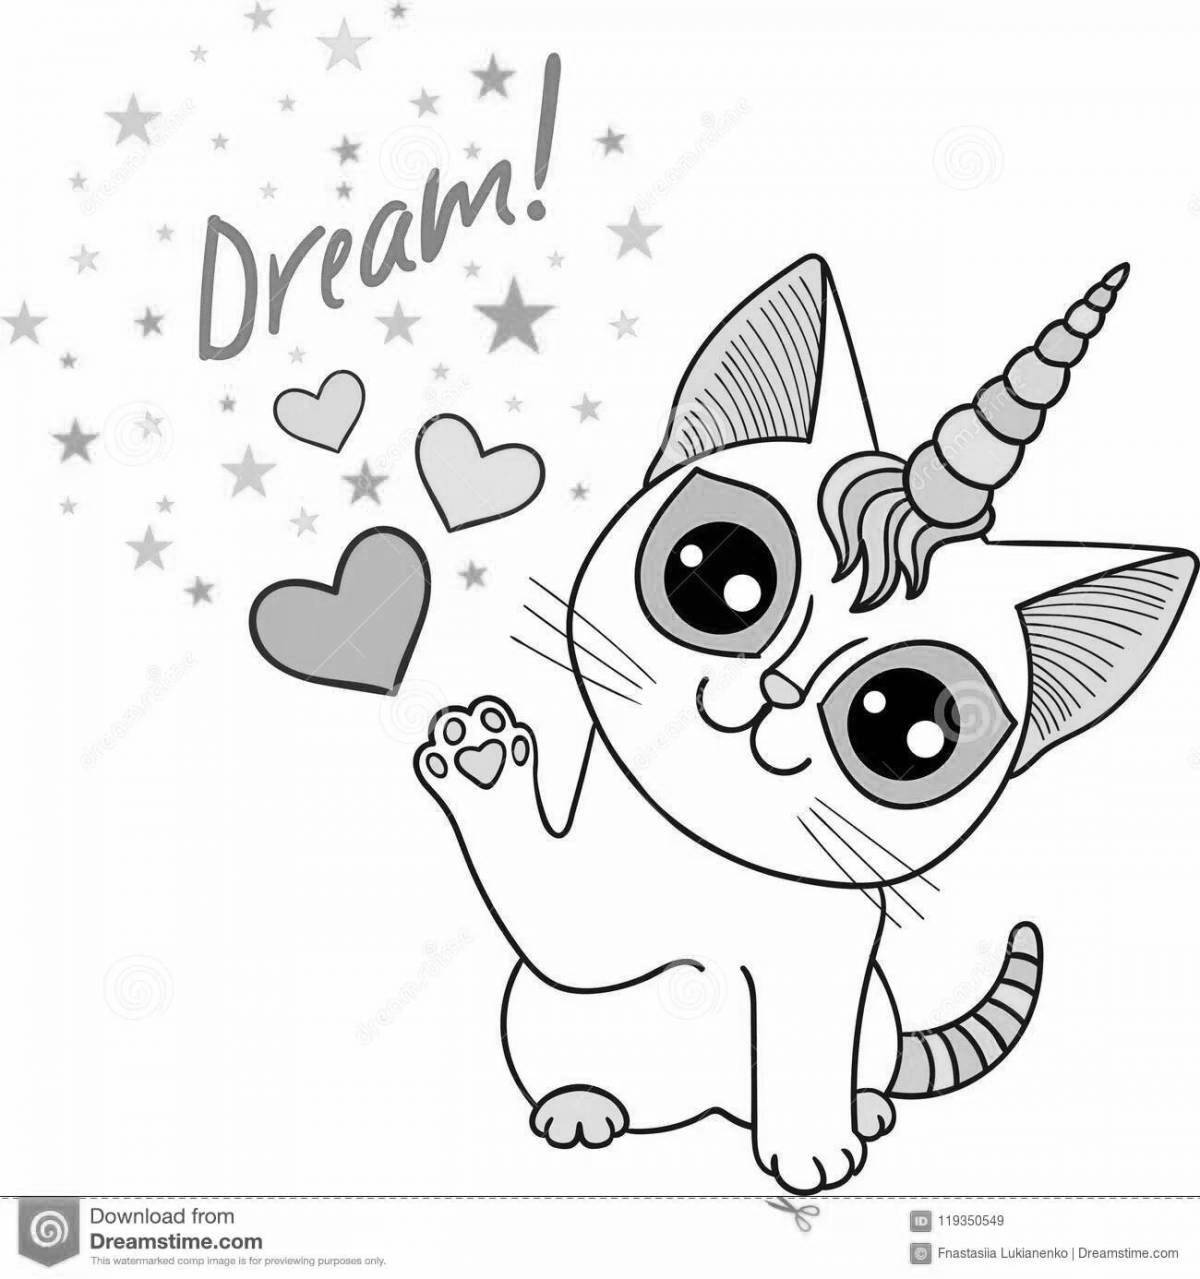 Felicity funny cat coloring page